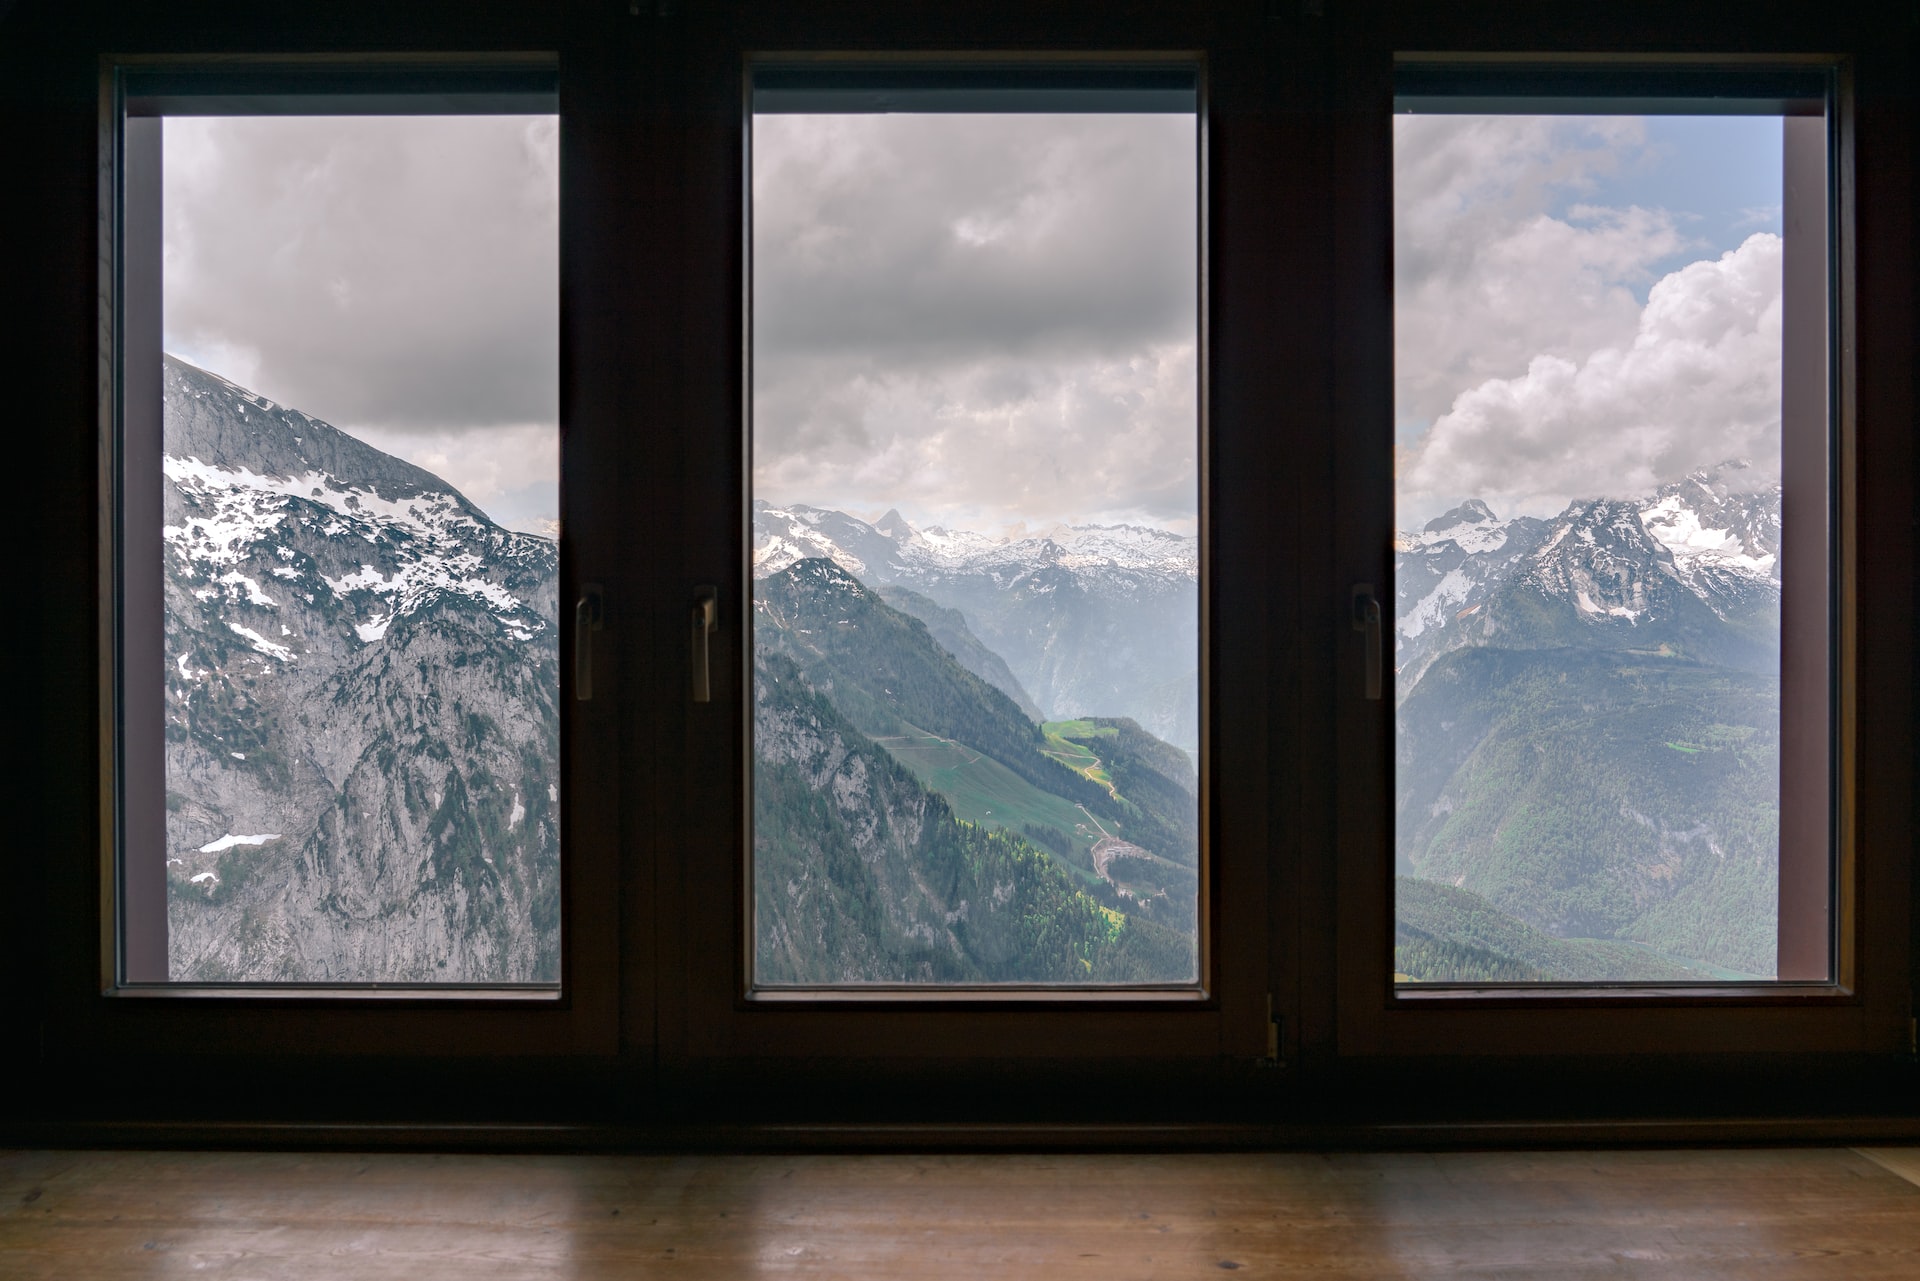 Acoustical Windows – They Only Work For Certain Frequencies